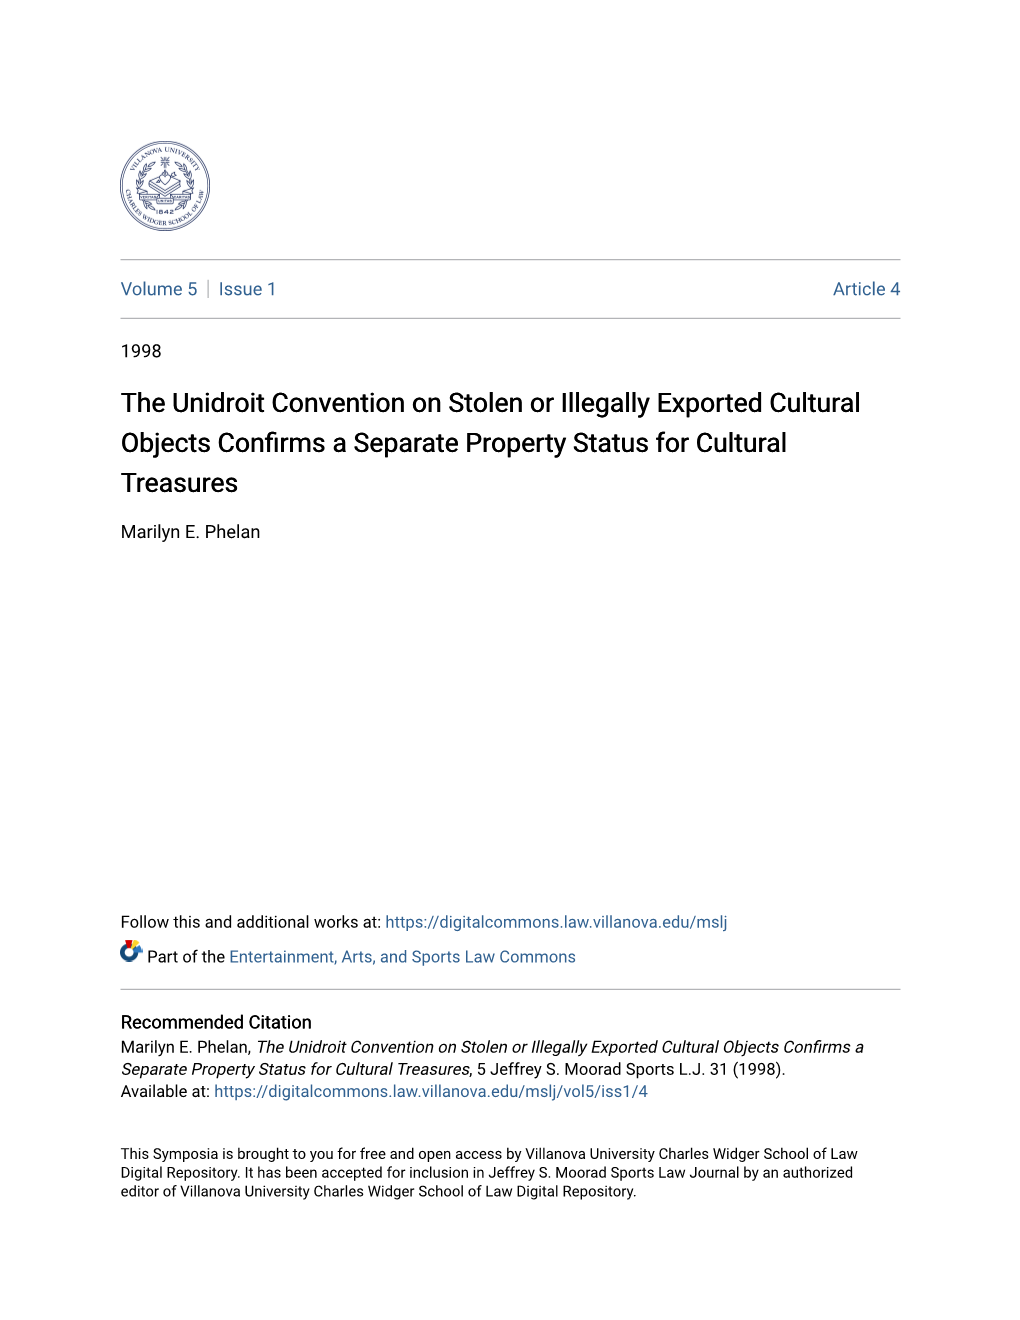 The Unidroit Convention on Stolen Or Illegally Exported Cultural Objects Confirms a Separate Property Status for Cultural Treasures